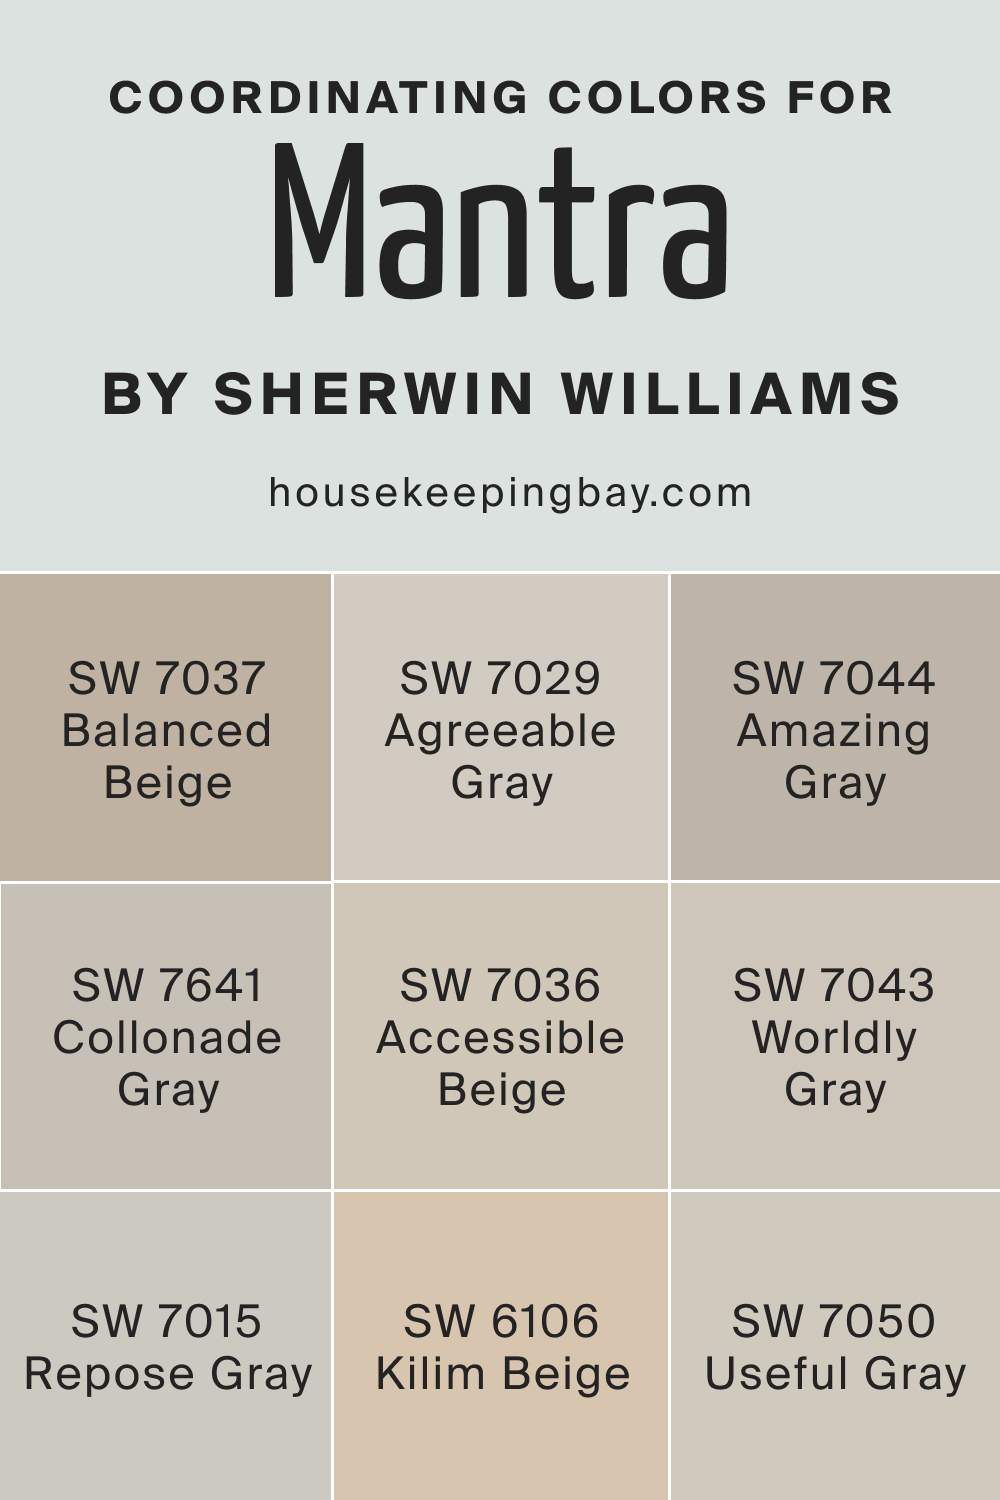 Coordinating Colors for SW 9631 Mantra by Sherwin Williams